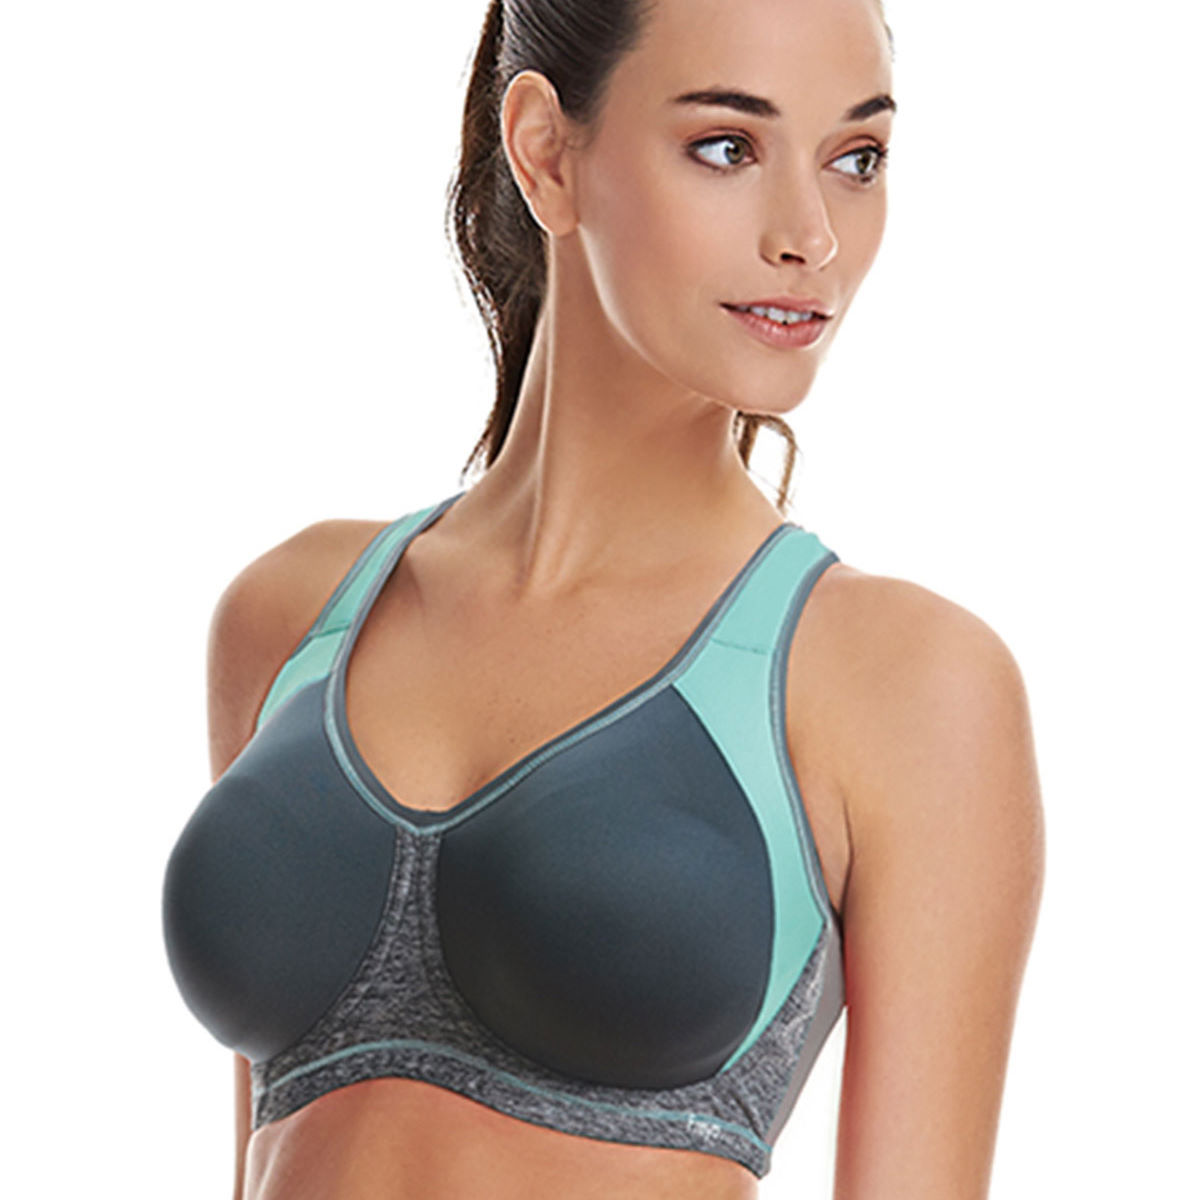 Finding the Best Bra for Breast Implants: Bra Shopping After